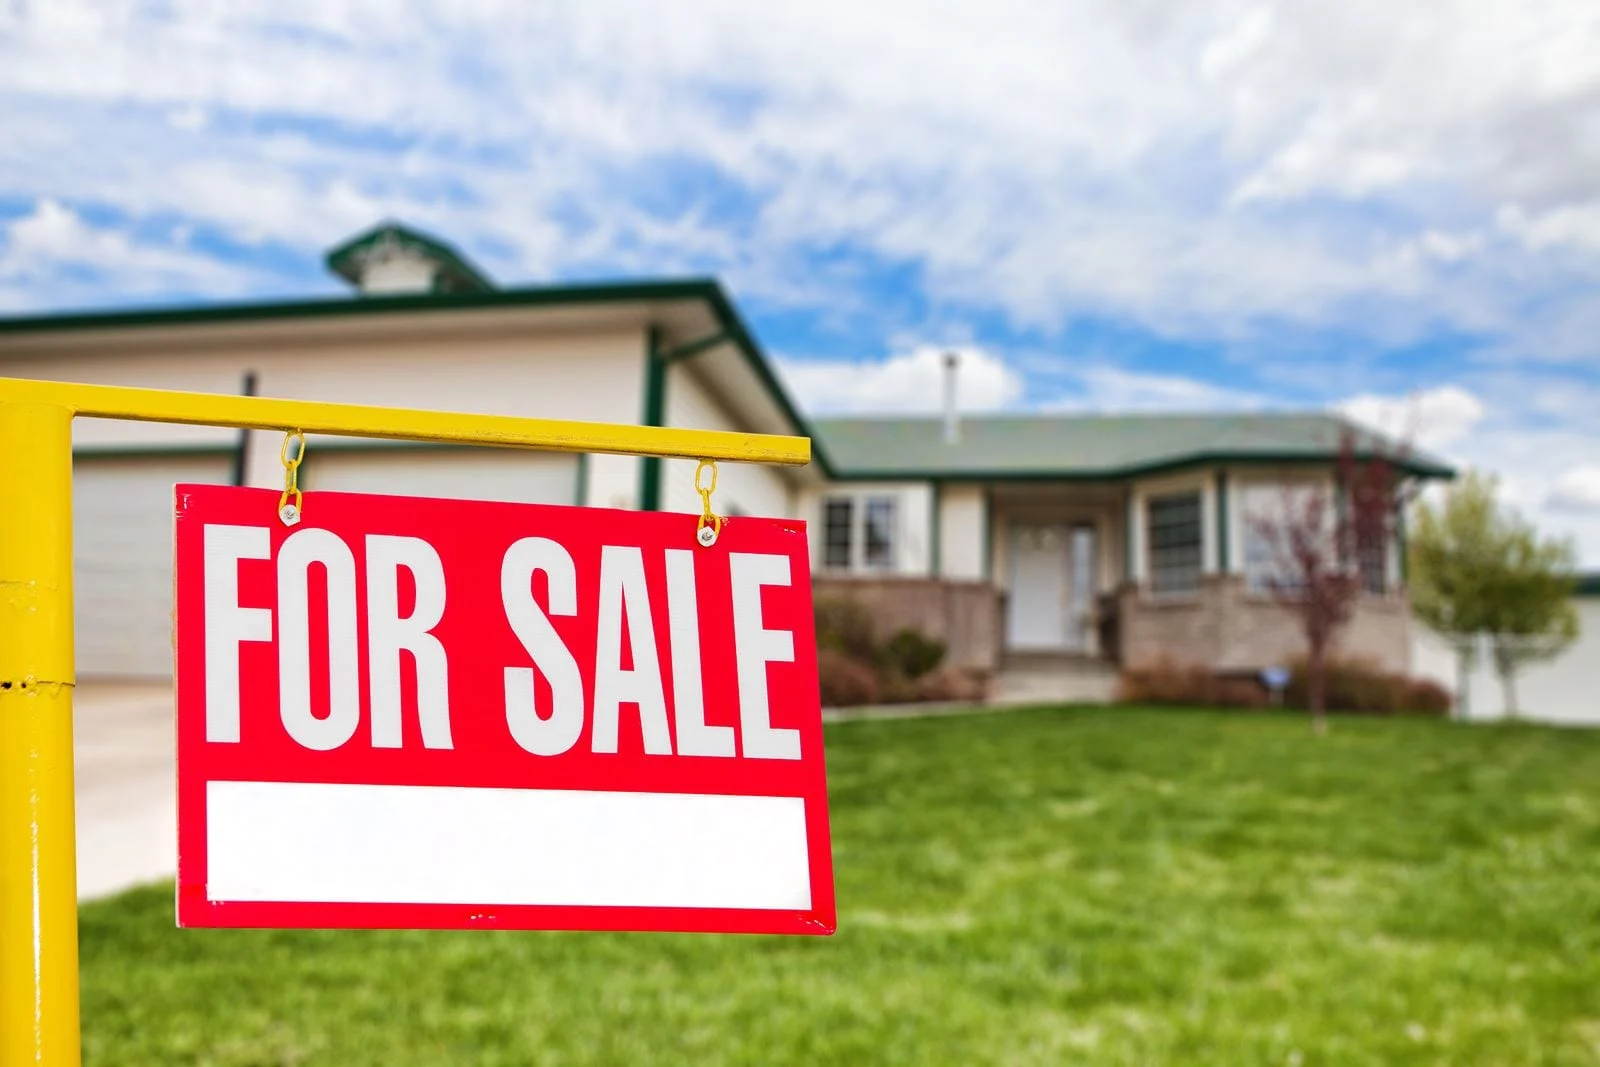 Can I Sell My House Privately After Listing With a Realtor?